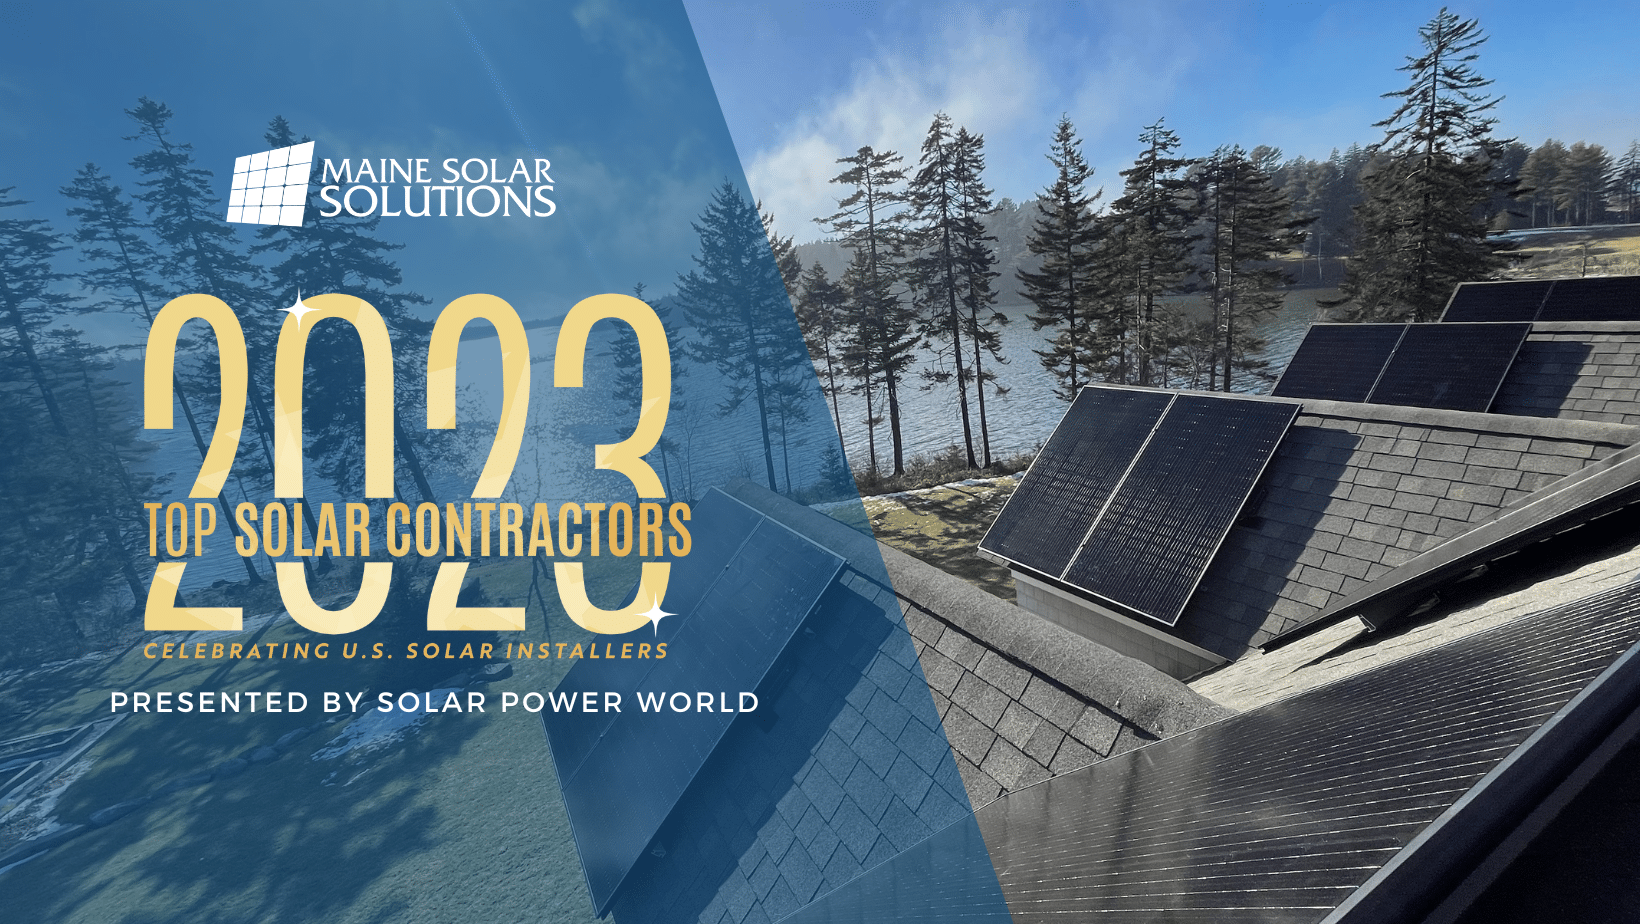 Maine Solar Solutions Makes The Top Solar Contractor List!